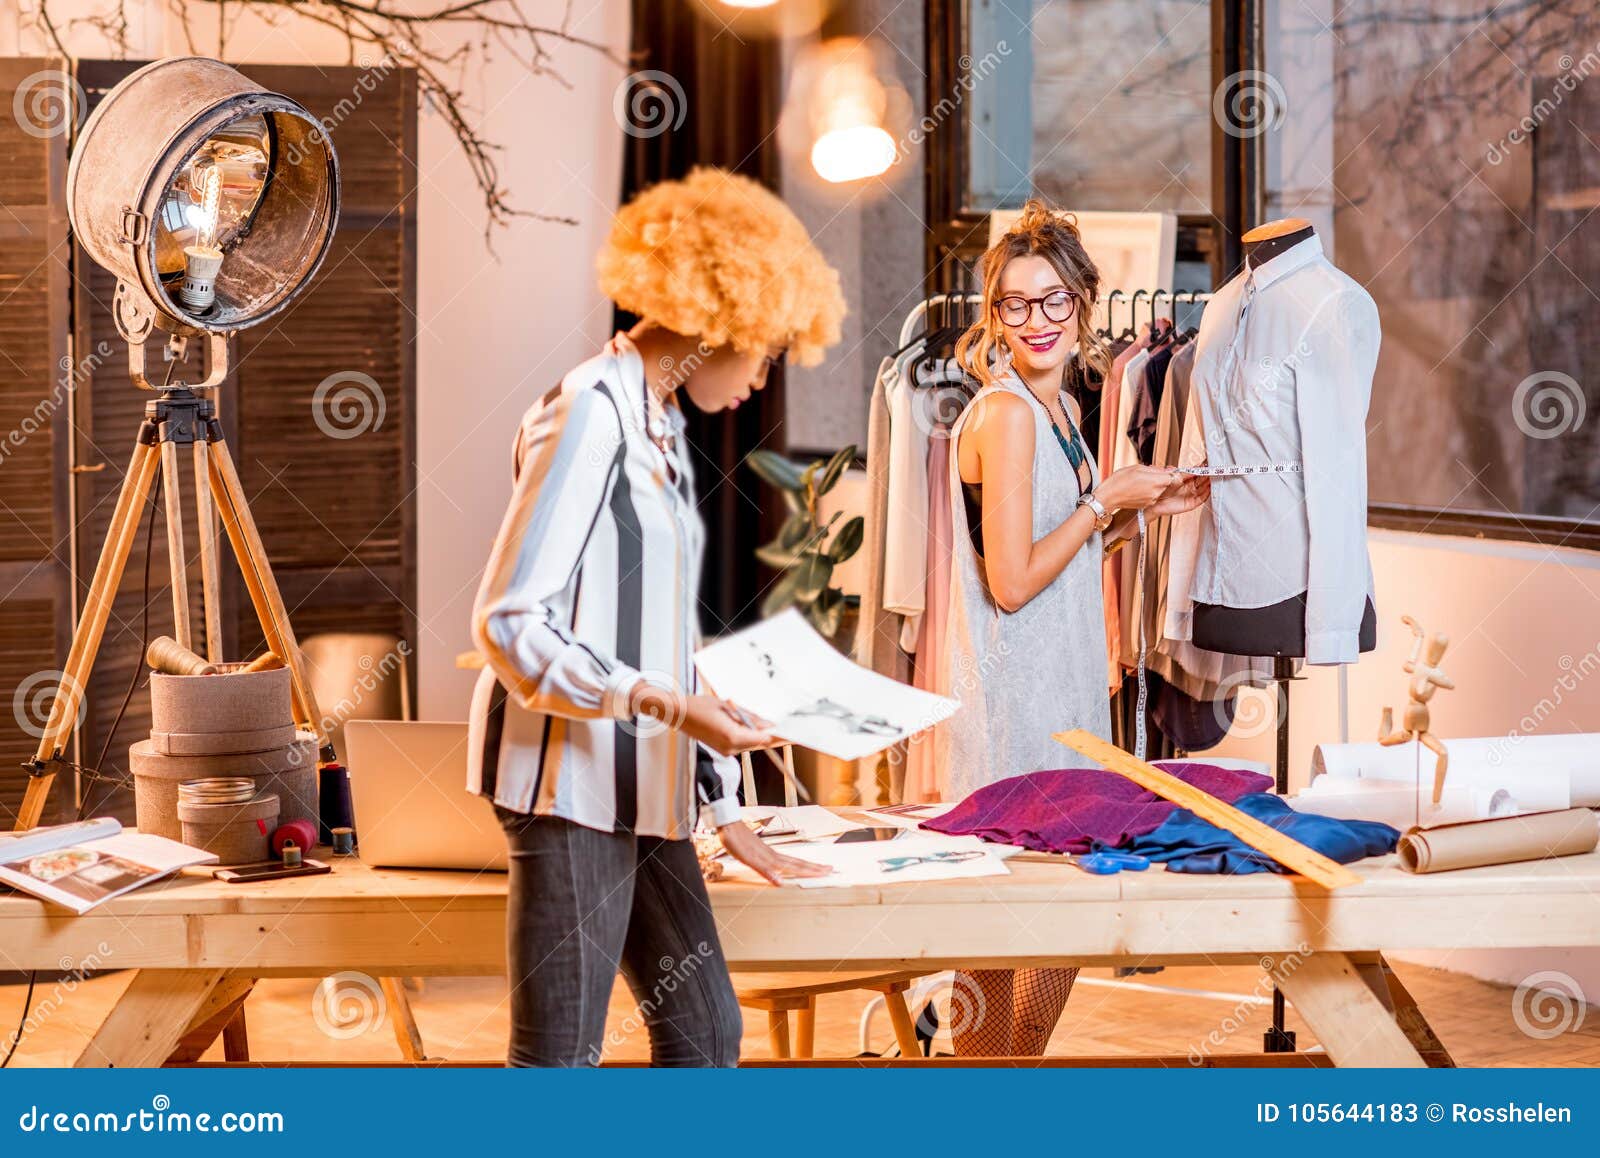 Fashion Designer Working at the Office Stock Image - Image of ...